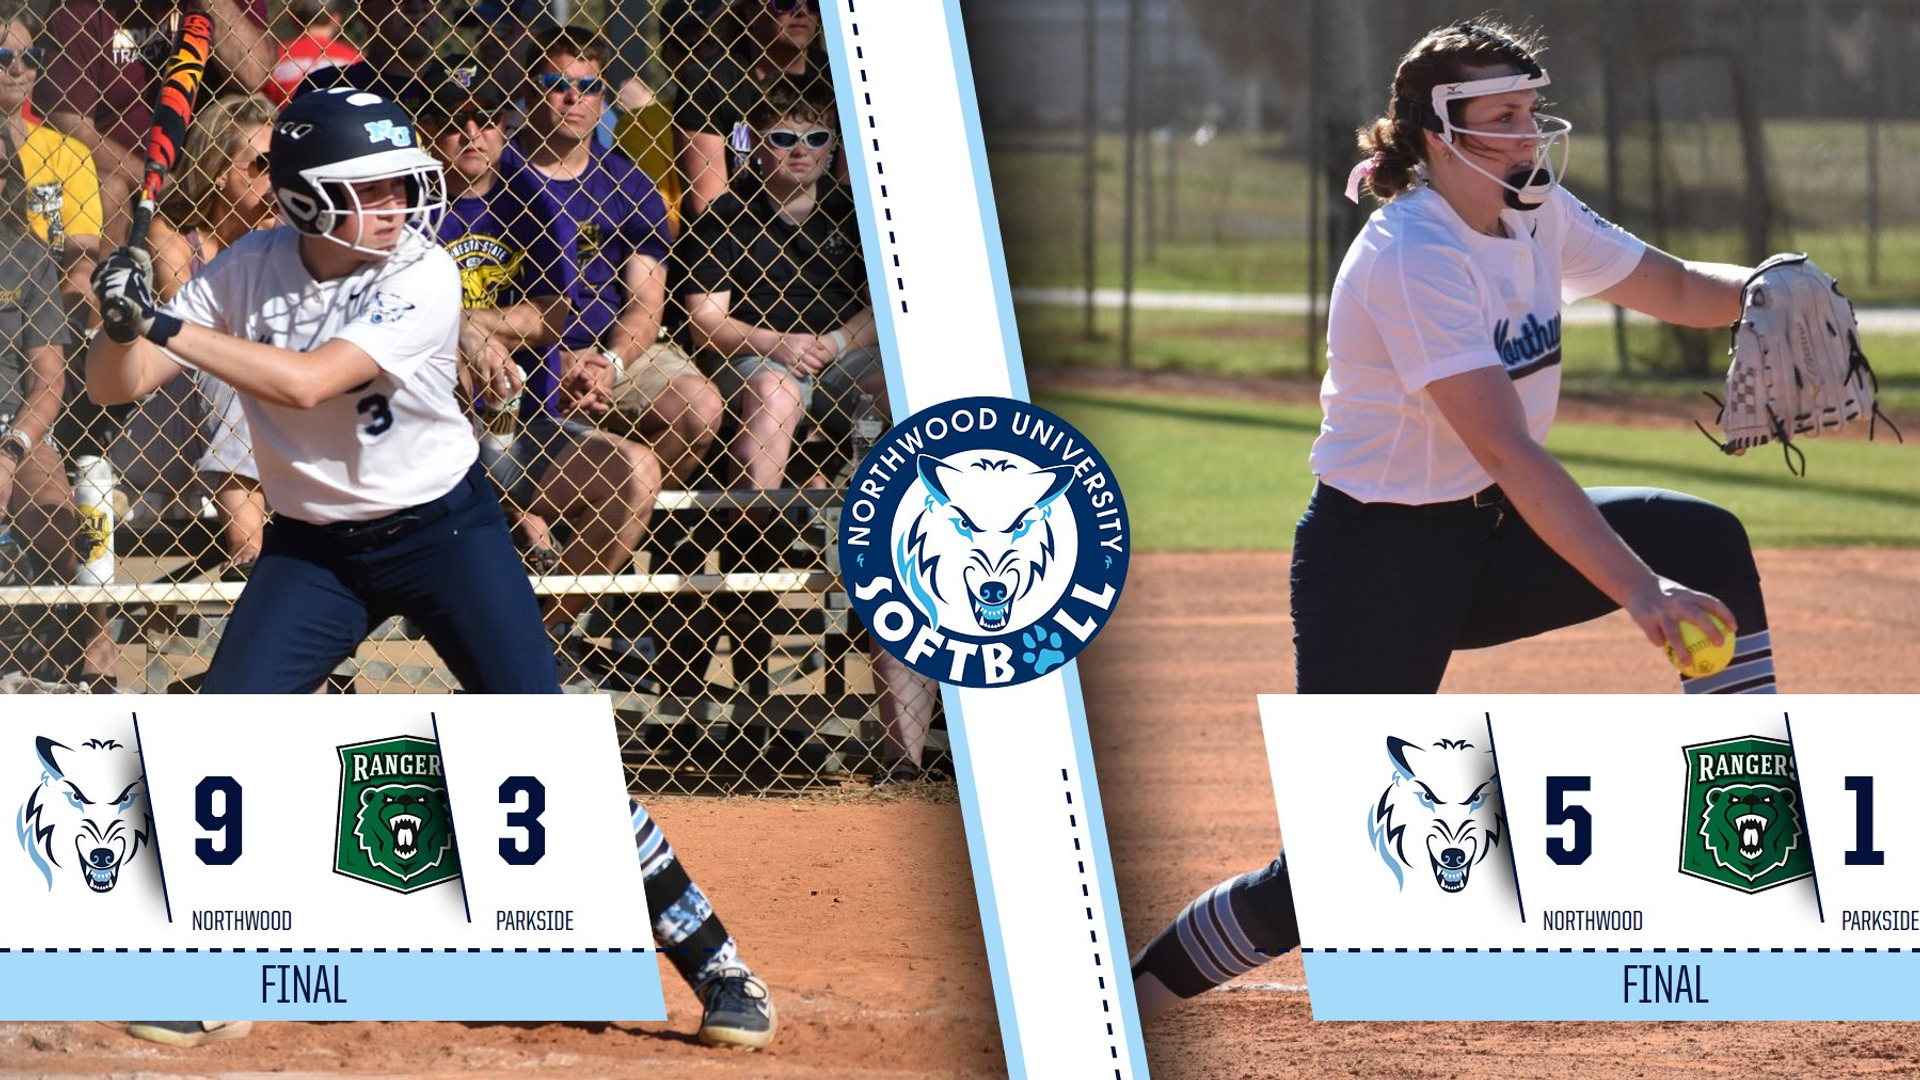 Timberwolves Softball Takes Two From Parkside, 9-3 and 5-1